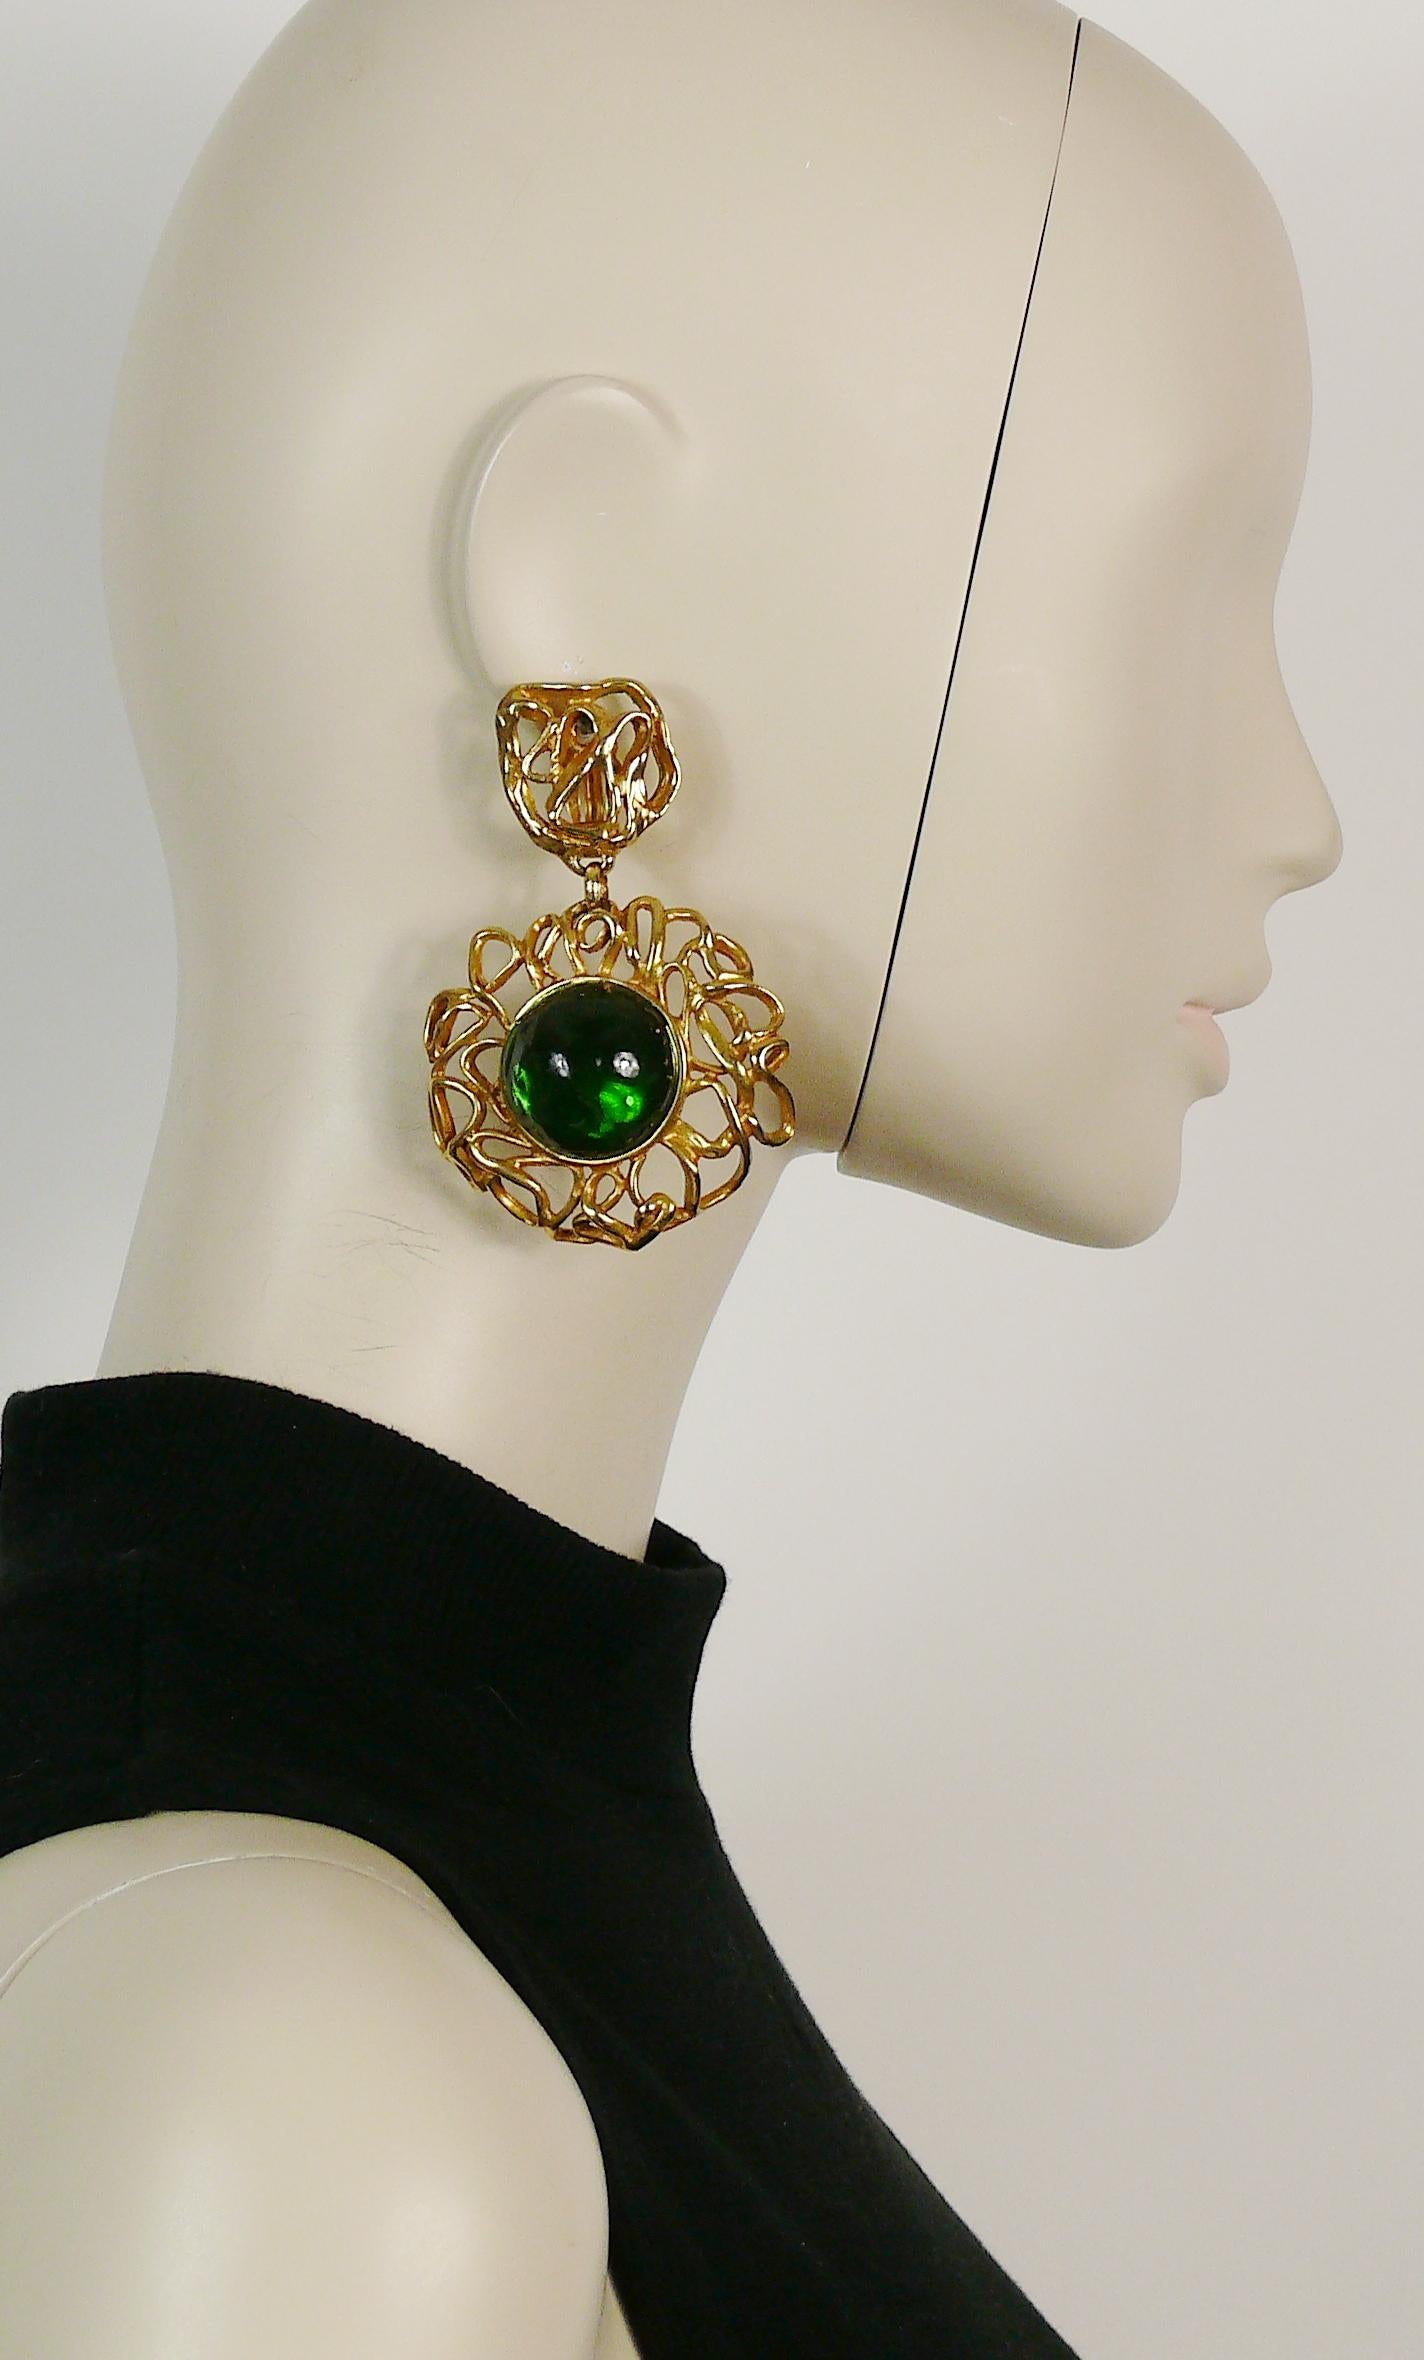 YVES SAINT LAURENT vintage massive dangling earrings (clip-on) featuring gold toned openwork wired metal embellished with a large emerald resin cabochon.   

Embossed YSL Made in France.
Numbered A0.

Indicative measurements : height approx. 8.3 cm